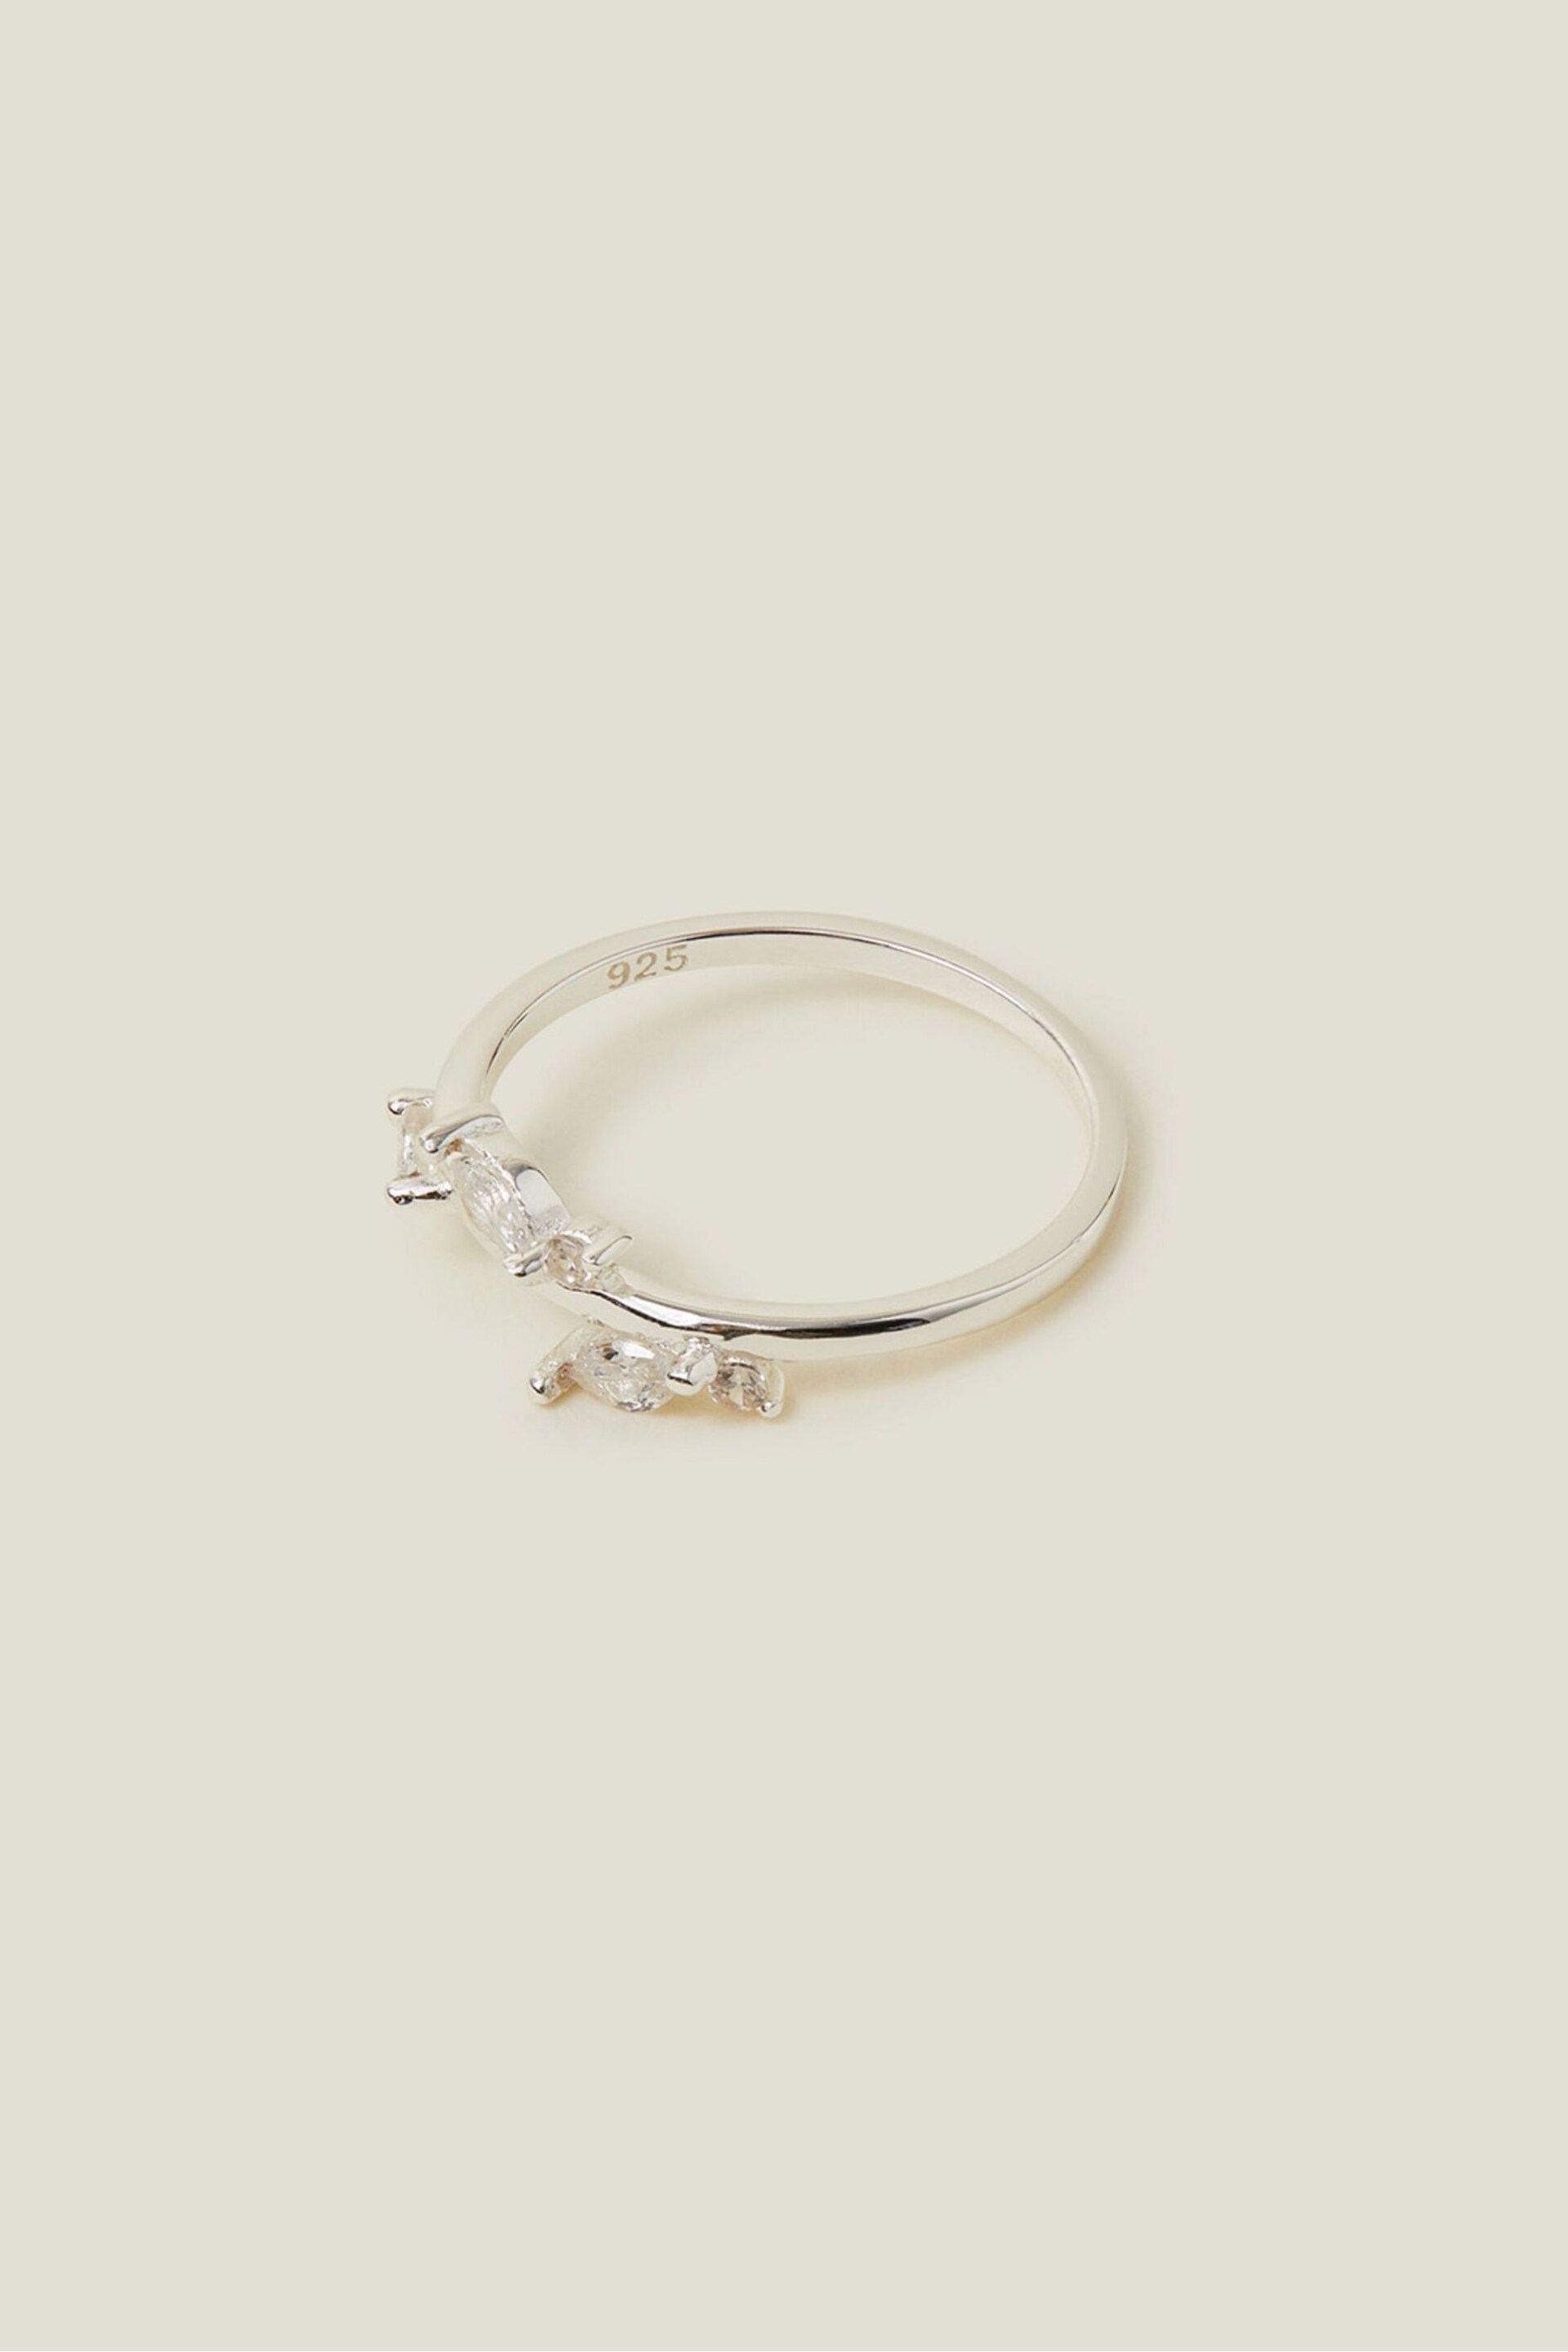 Accessorize Sterling Silver Plated Vine Ring - Image 2 of 3